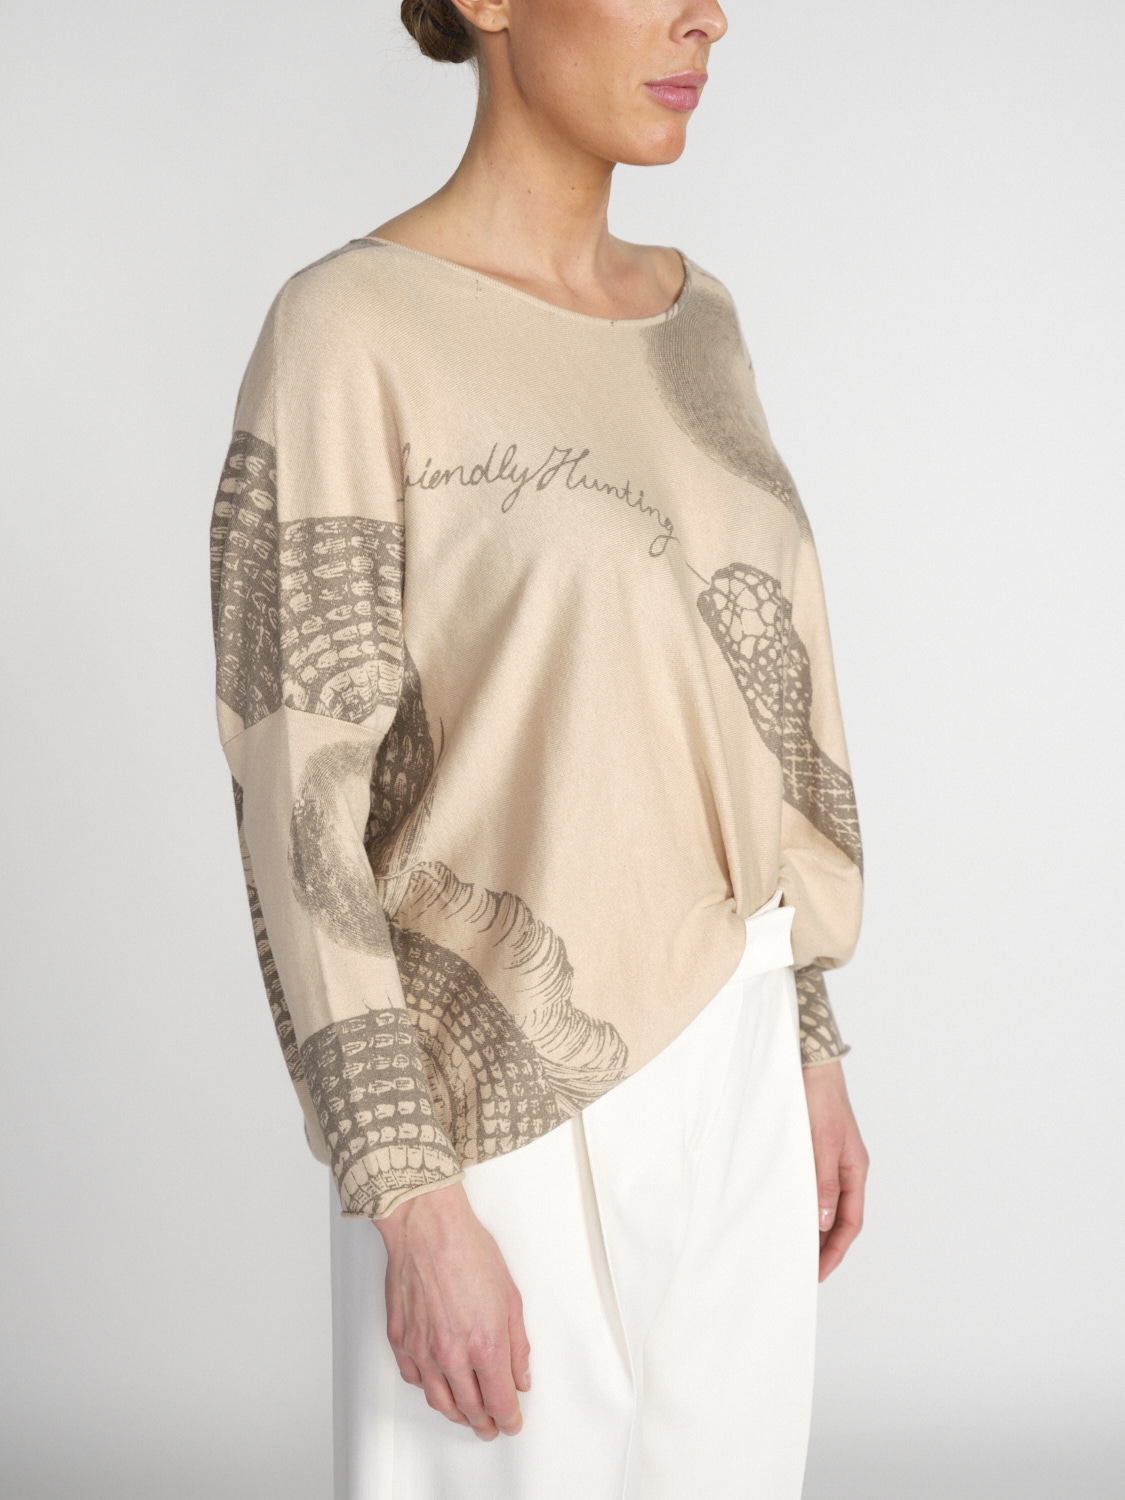 friendly hunting Imara Brighton - Lightweight sweater made from a cotton-cashmere blend  beige S